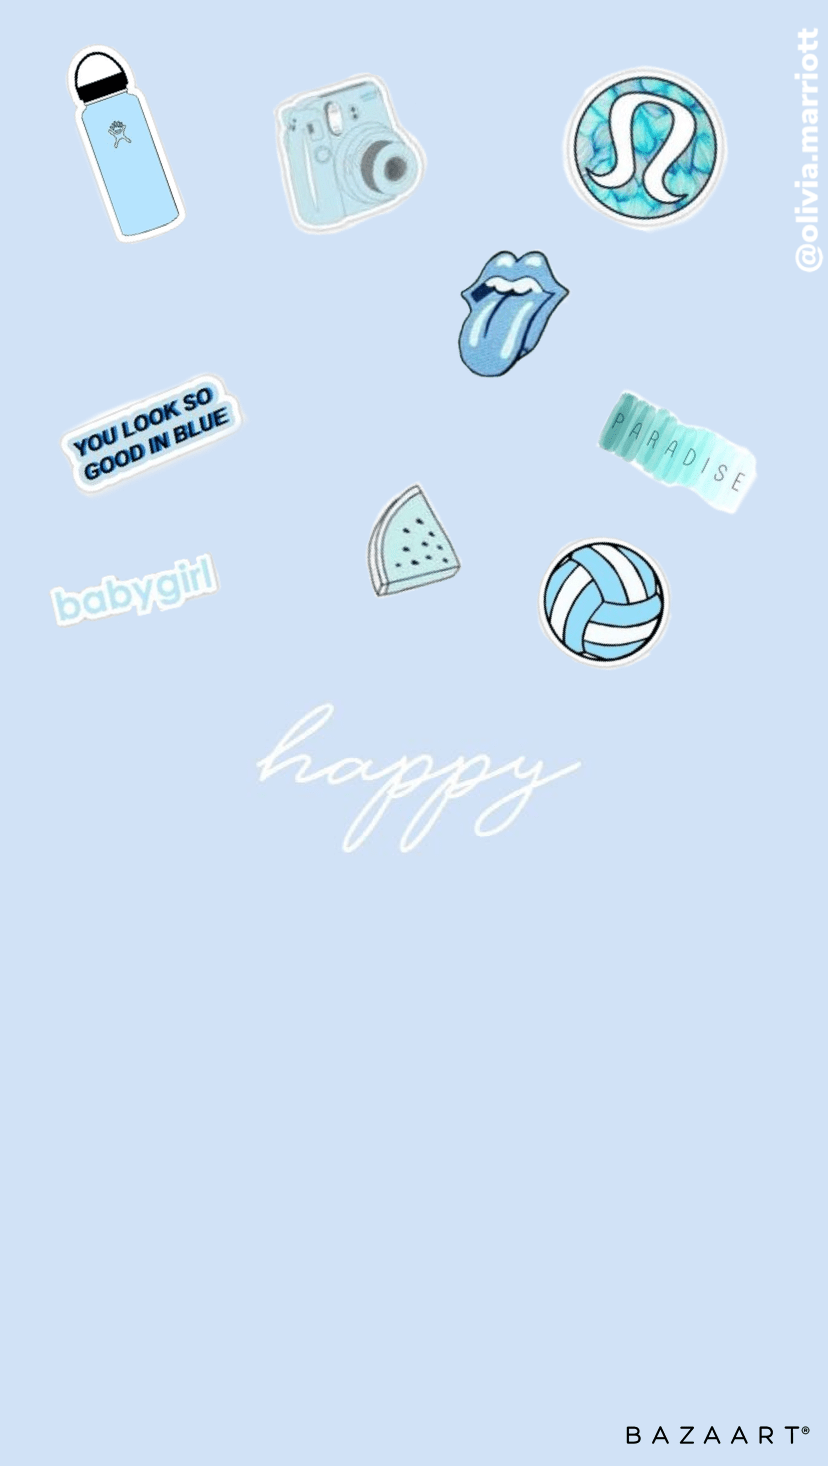 Blue aesthetic wallpaper with stickers and the words 